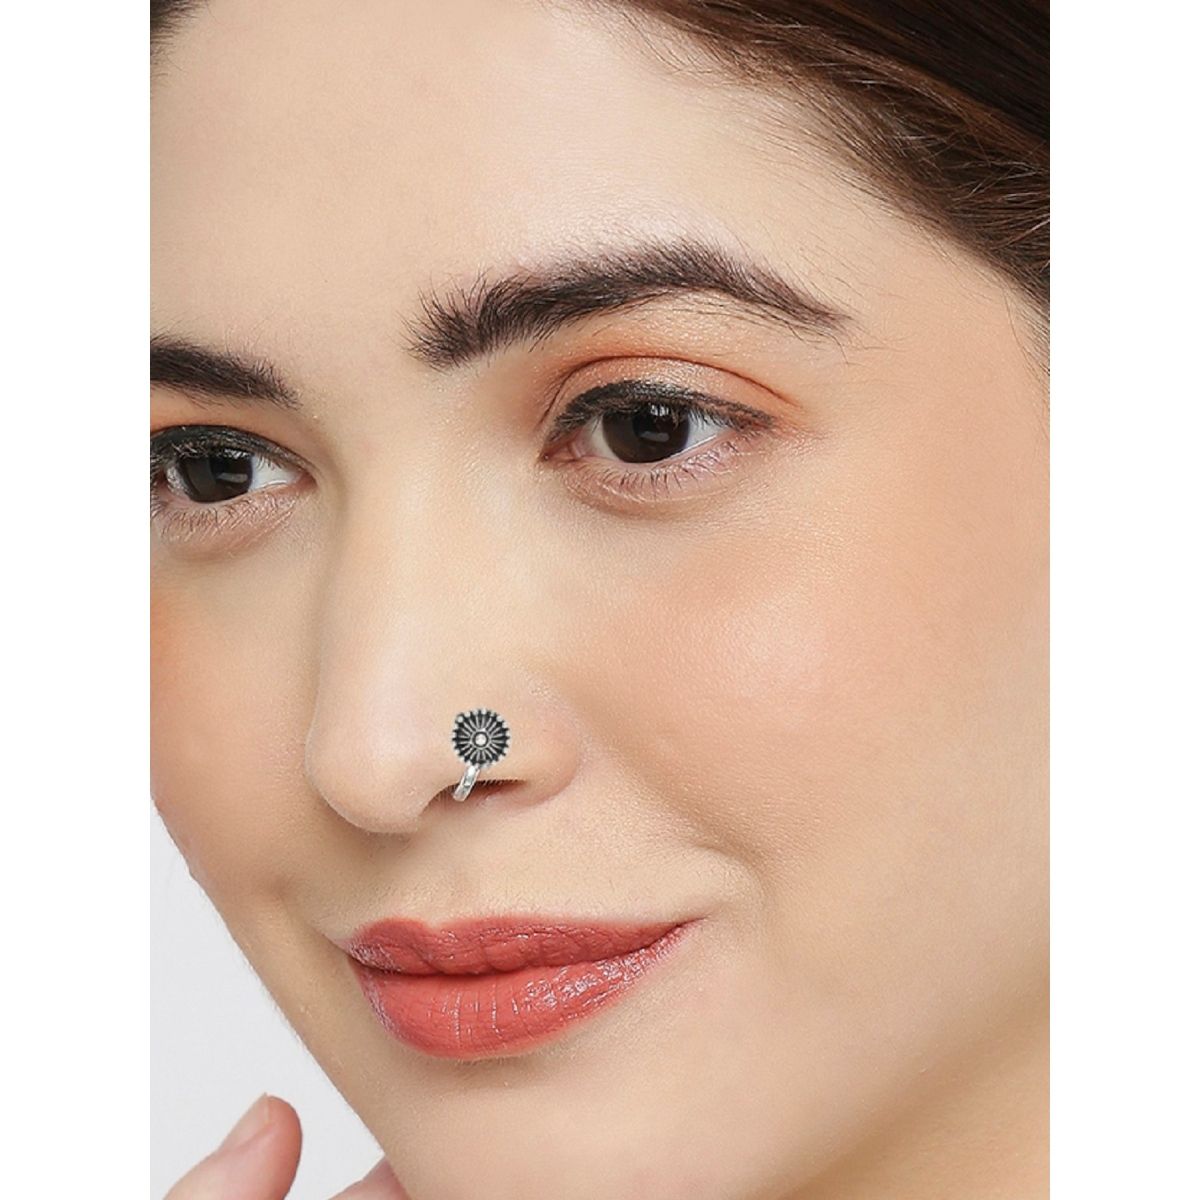 Solid Sterling Silver Oxidized Nose Stud Twist nose ring L Bend 24g | eBay